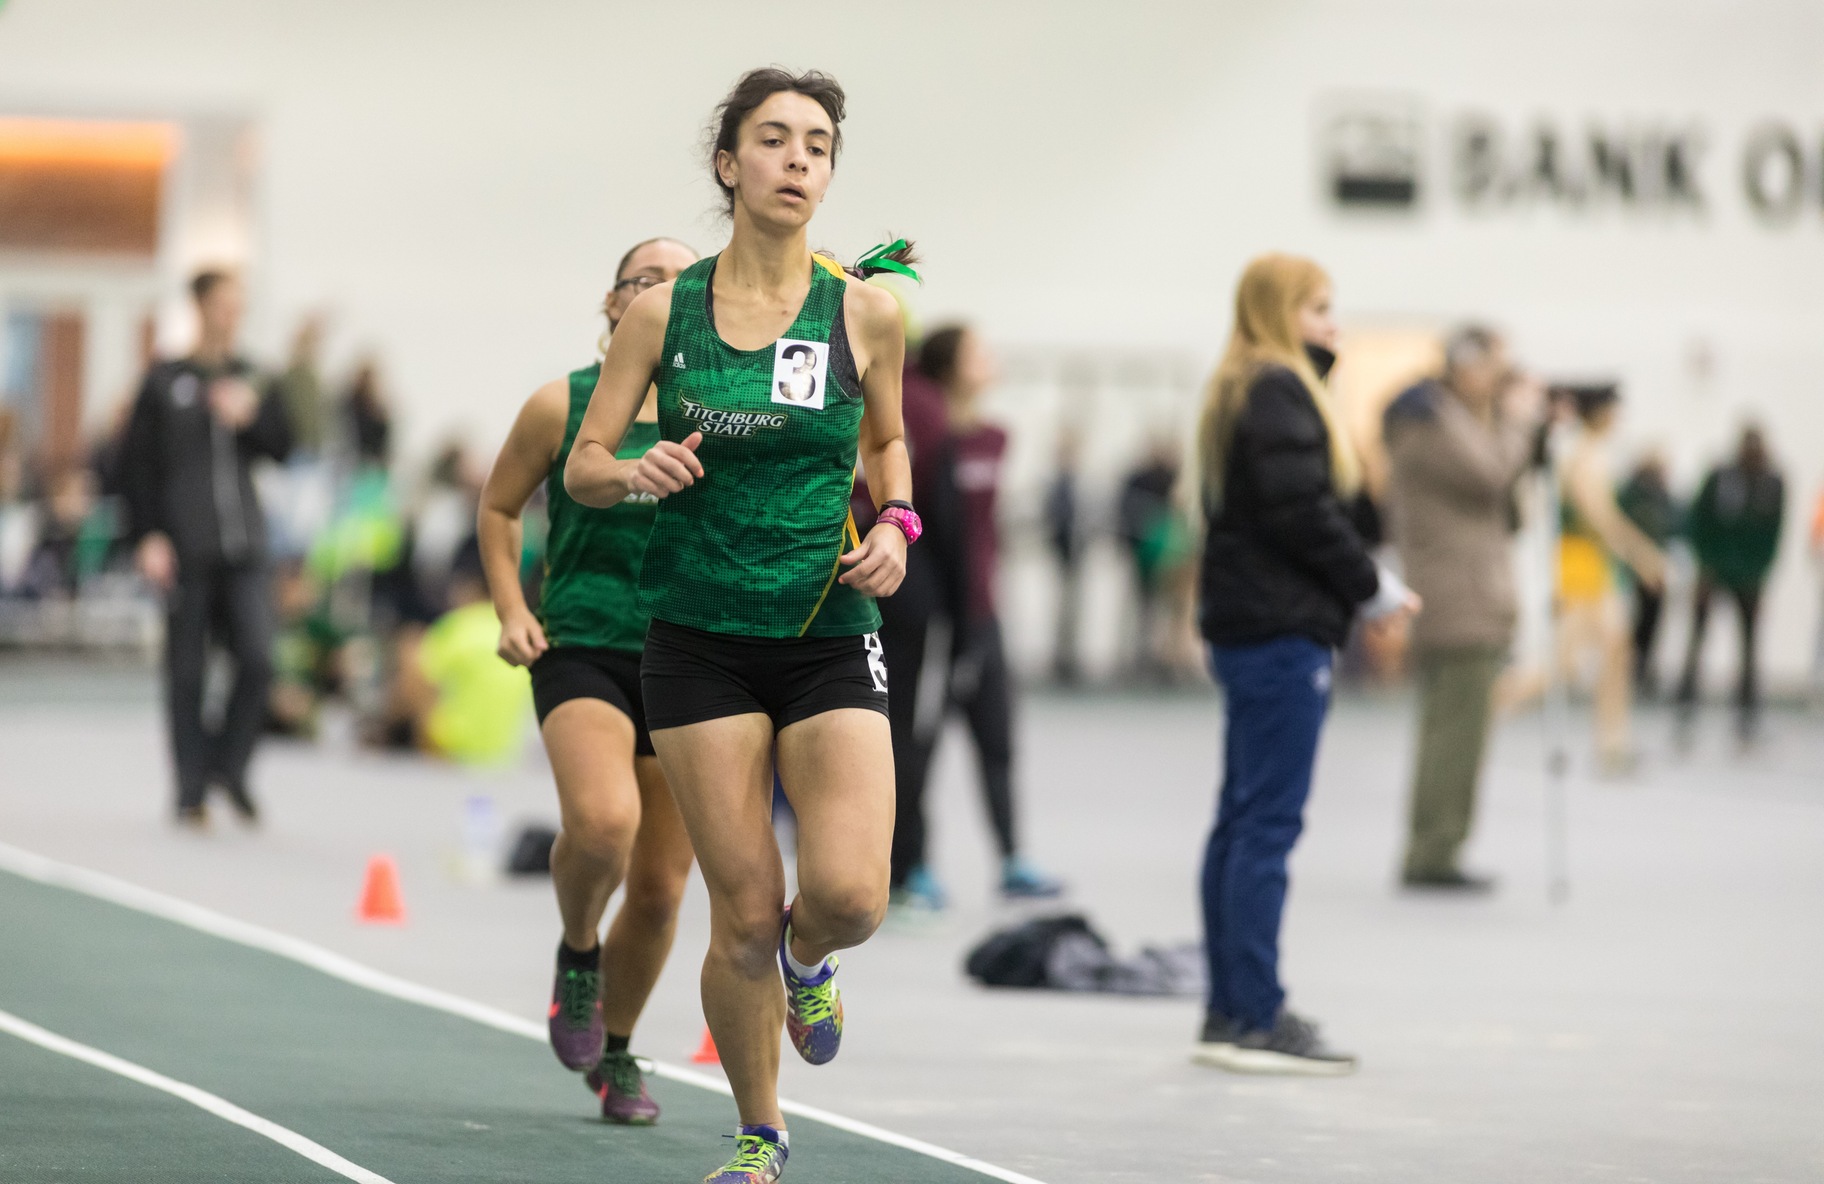 Falcons Place Fourth At MASCAC Championships